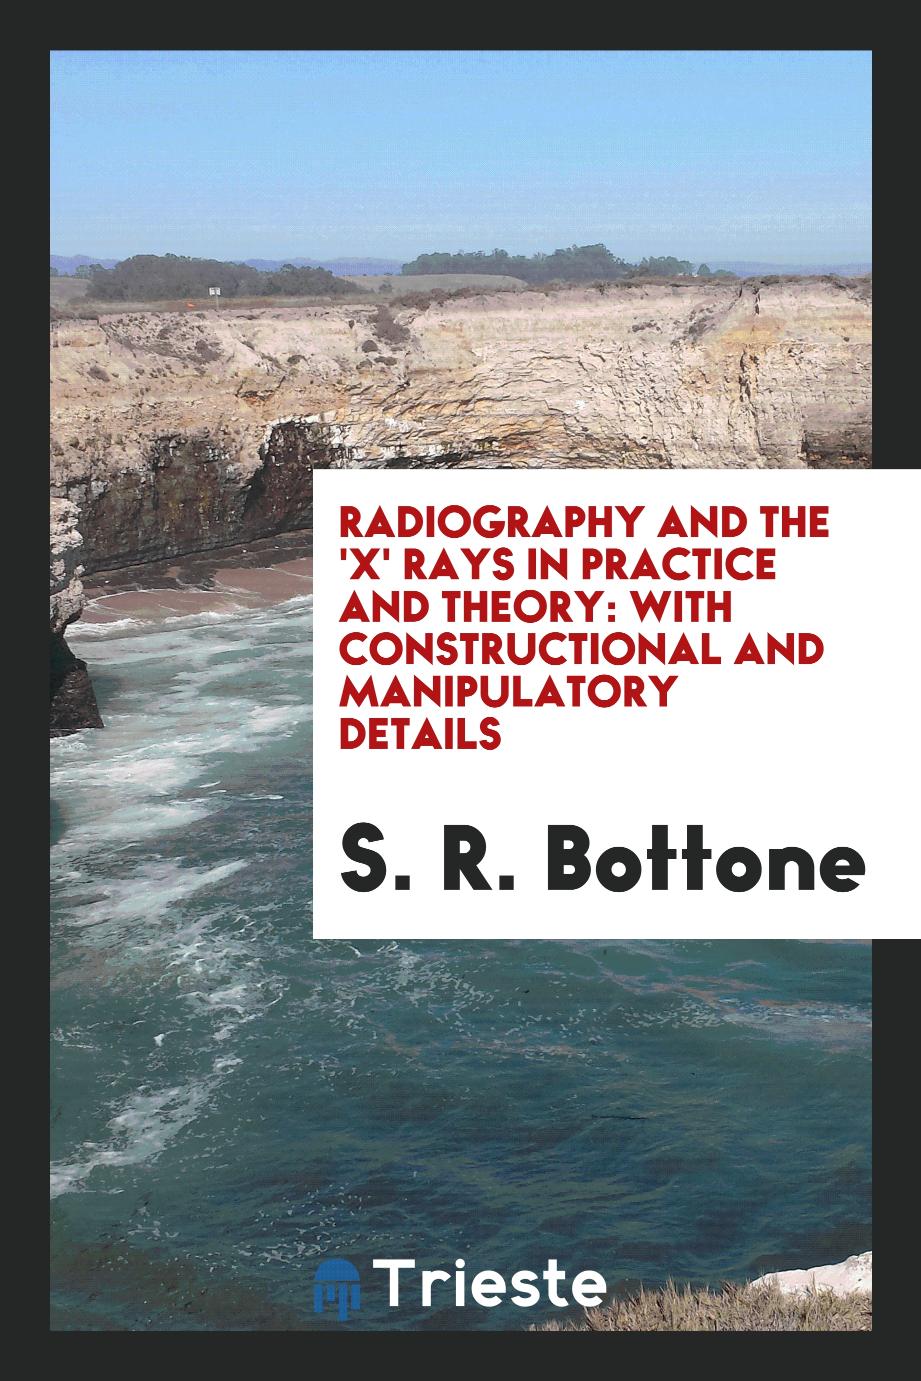 Radiography and the 'X' Rays in Practice and Theory: With Constructional and Manipulatory Details